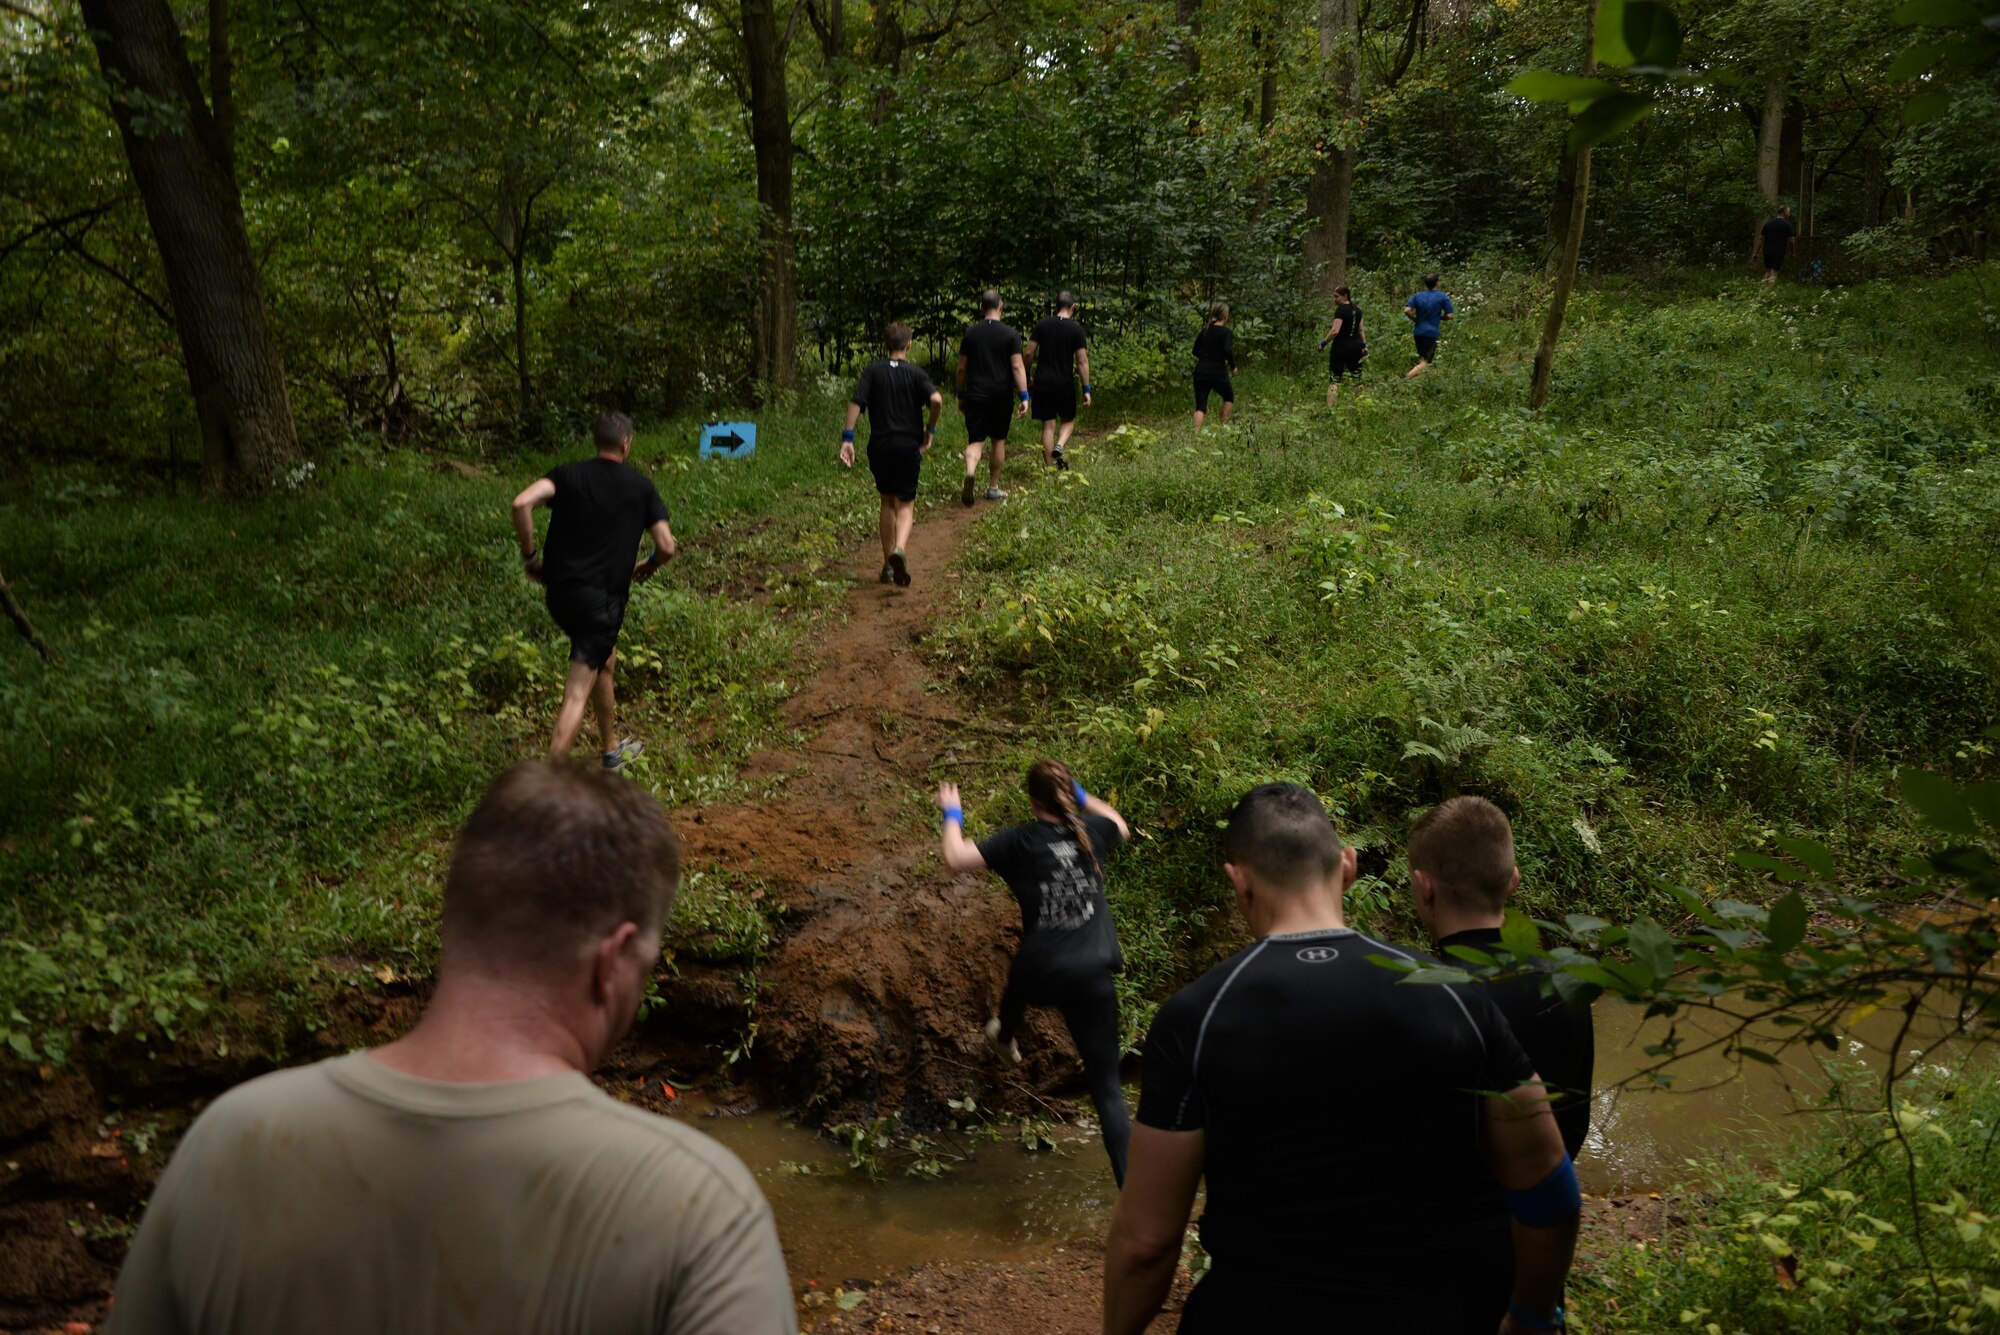 Airmen from the 70th Intelligence, Surveillance and Reconnaissance Wing cross a creek as they progress toward the end of the 2016 Savage Race October 8, 2016 at Kennedyville, Md. 70th ISRW participants endured a seven-mile obstacle course of cargo net walls, creeks, ice cold water and climbing to test their stamina and strength as a team. (U.S. Air Force photo/Staff Sgt. Alexandre Montes)